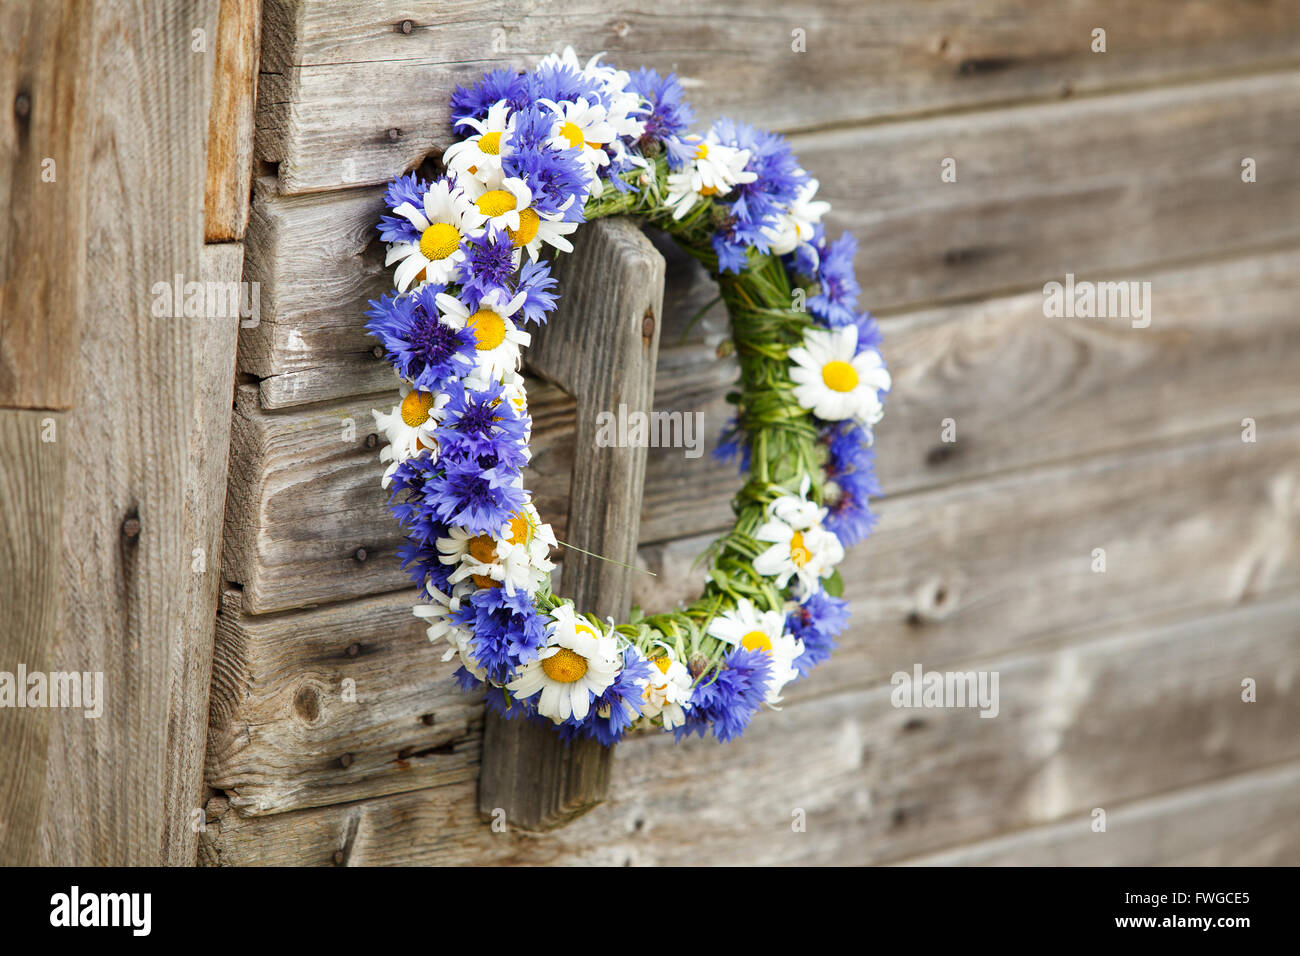 Chaplet from blue cornflowers on the wooden door Stock Photo